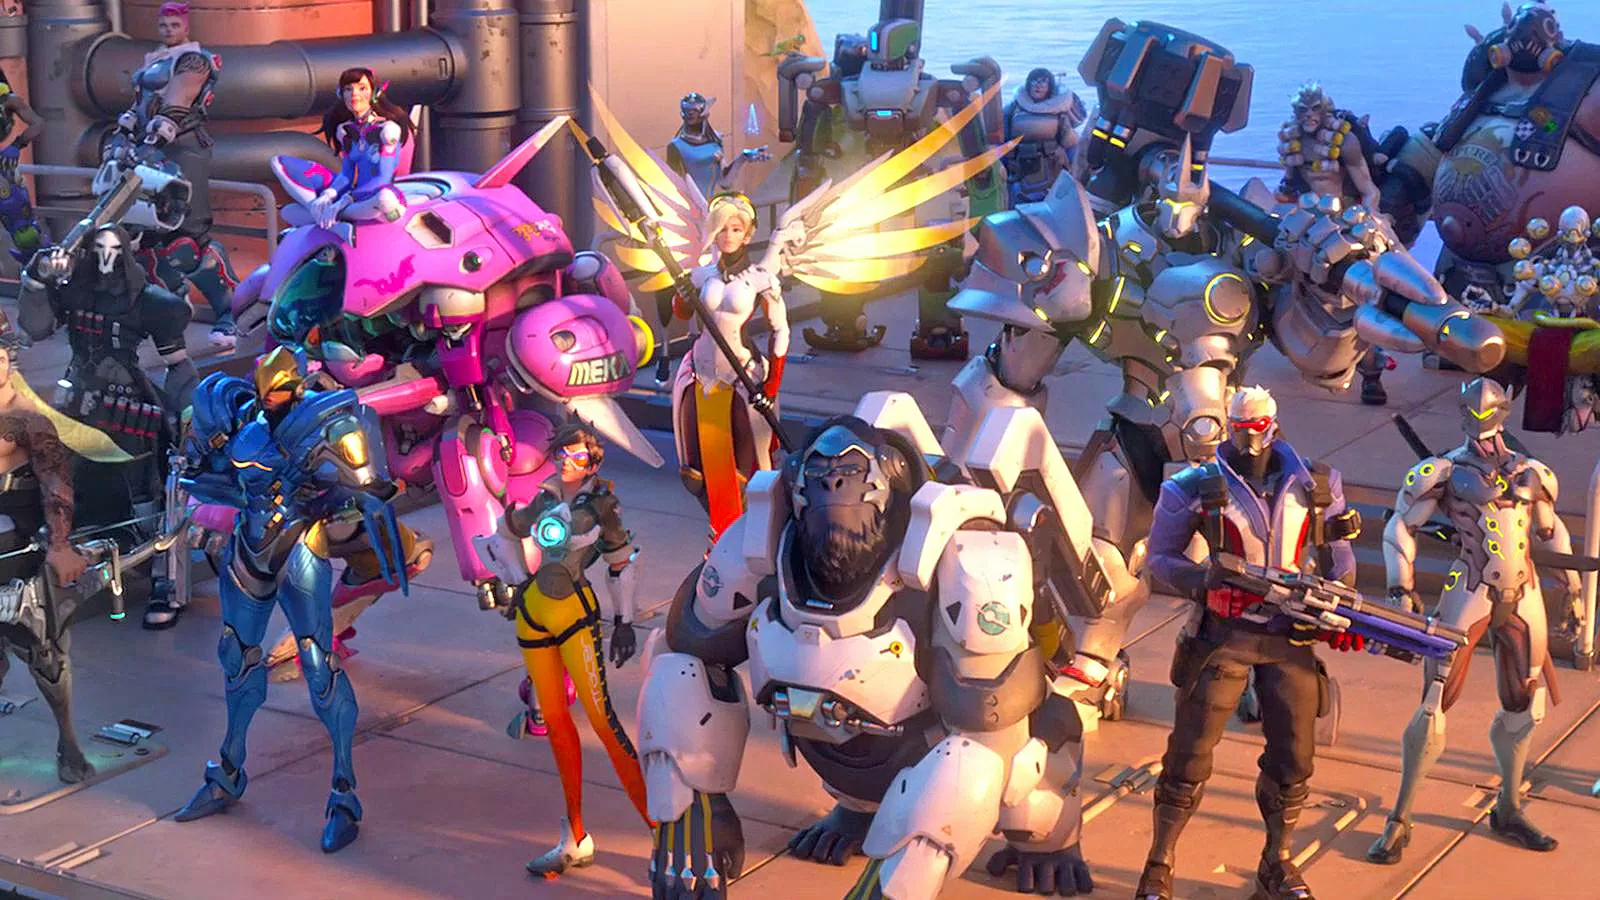 'Overwatch' is free to play this holiday weekend